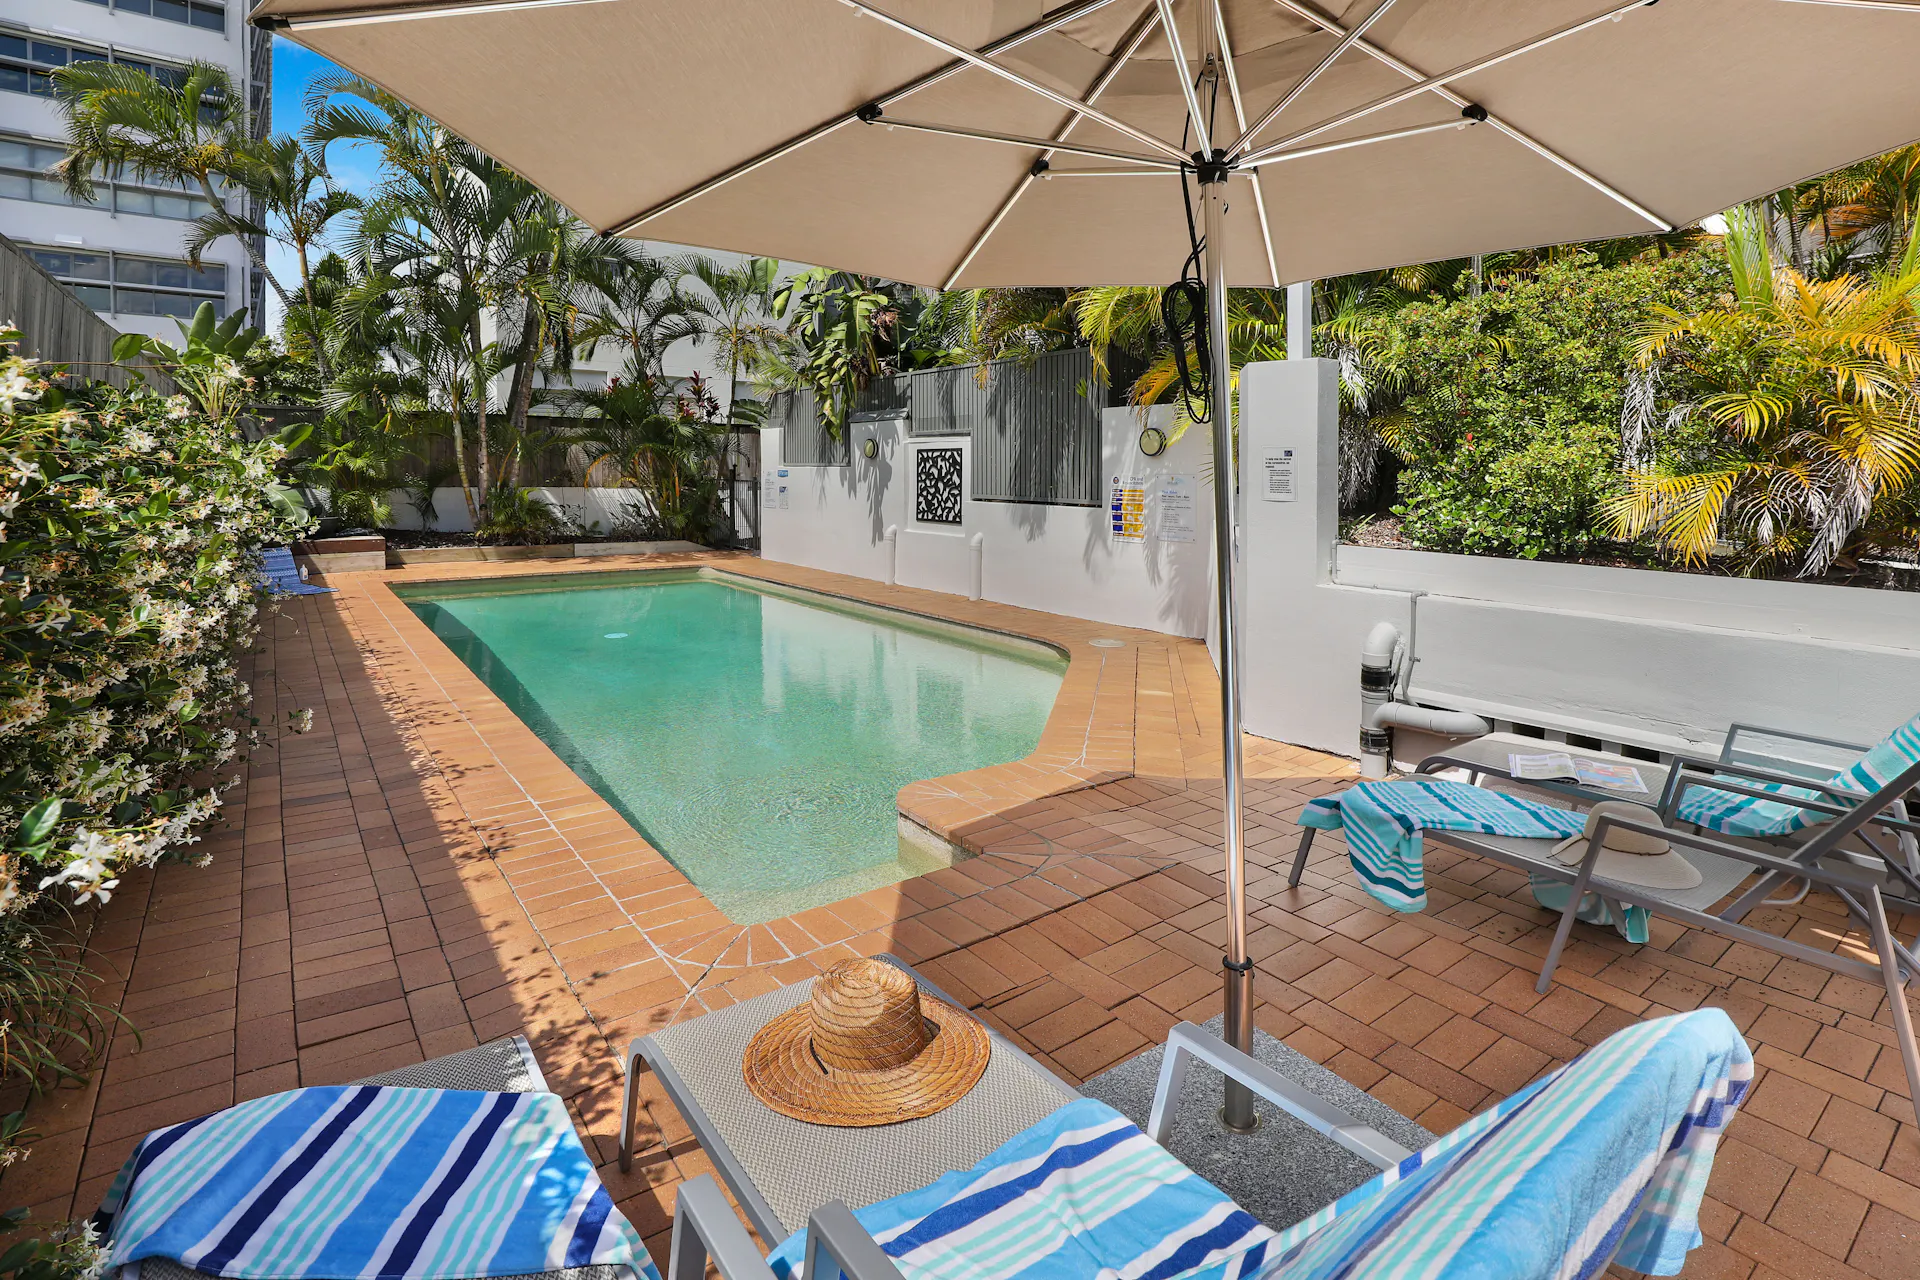 relax by our heated pool